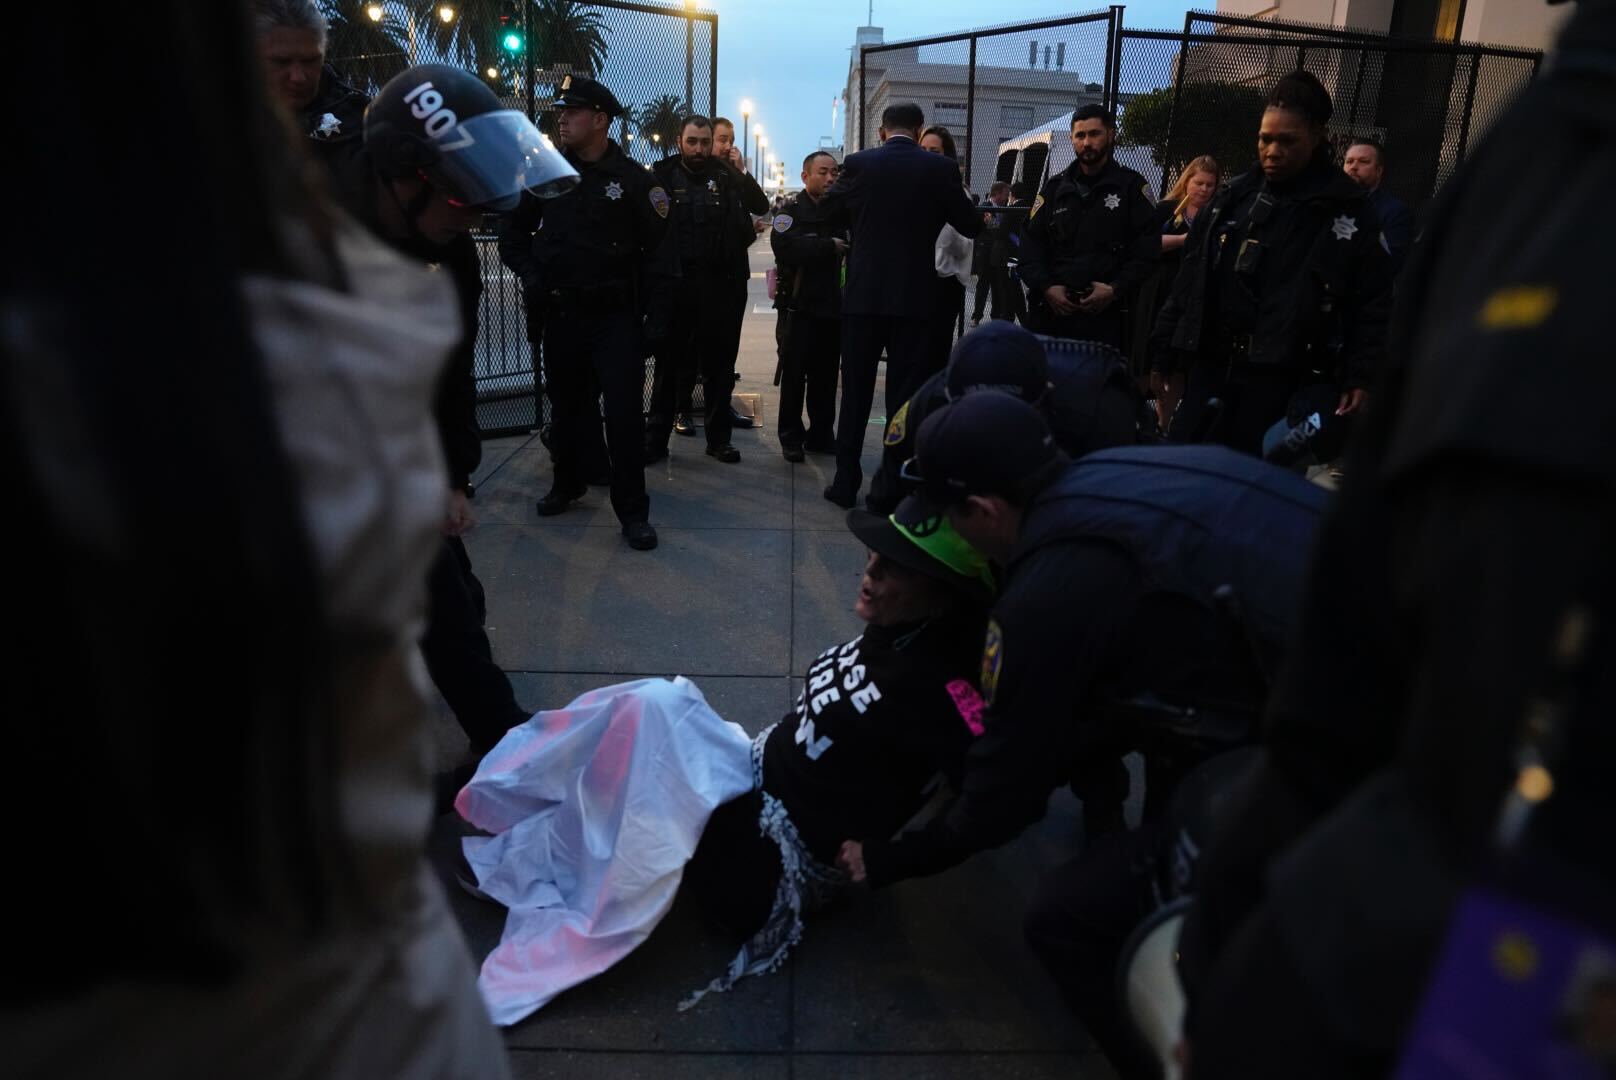 Police restrain a protester on the ground.